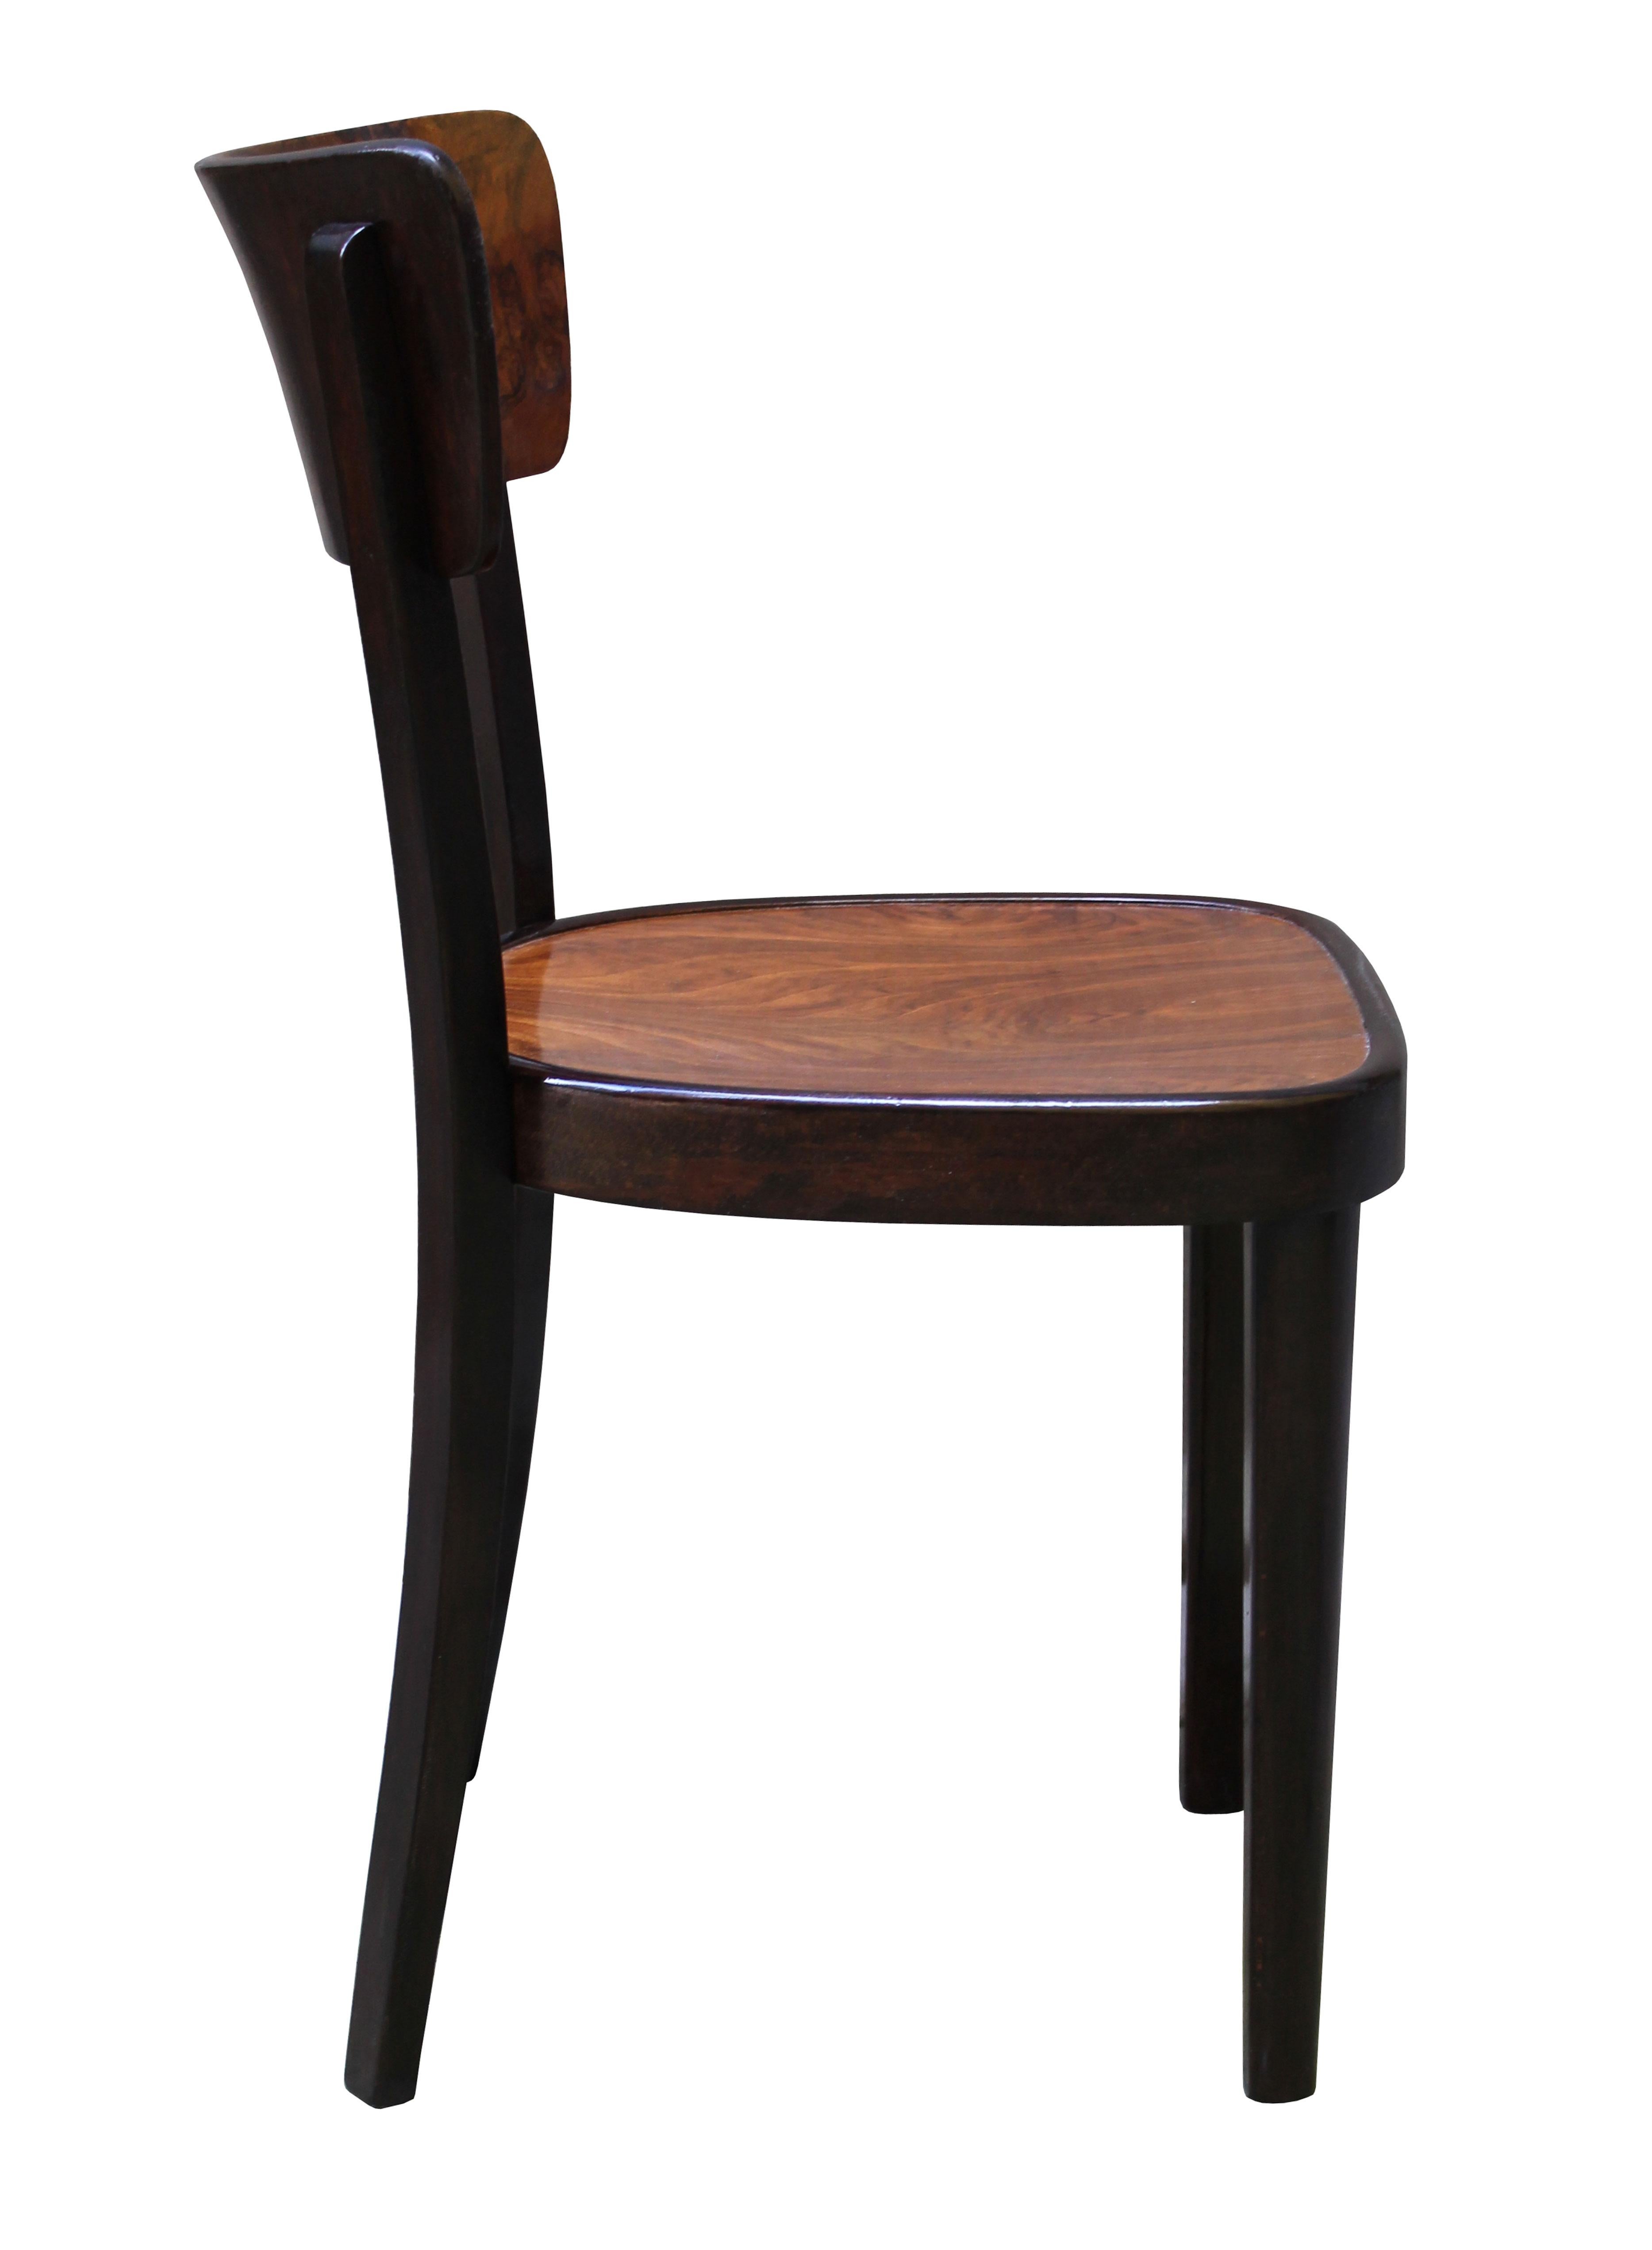 Lacquered Pair of 1930s Dining Chairs Model a 524 3/4 by Thonet For Sale